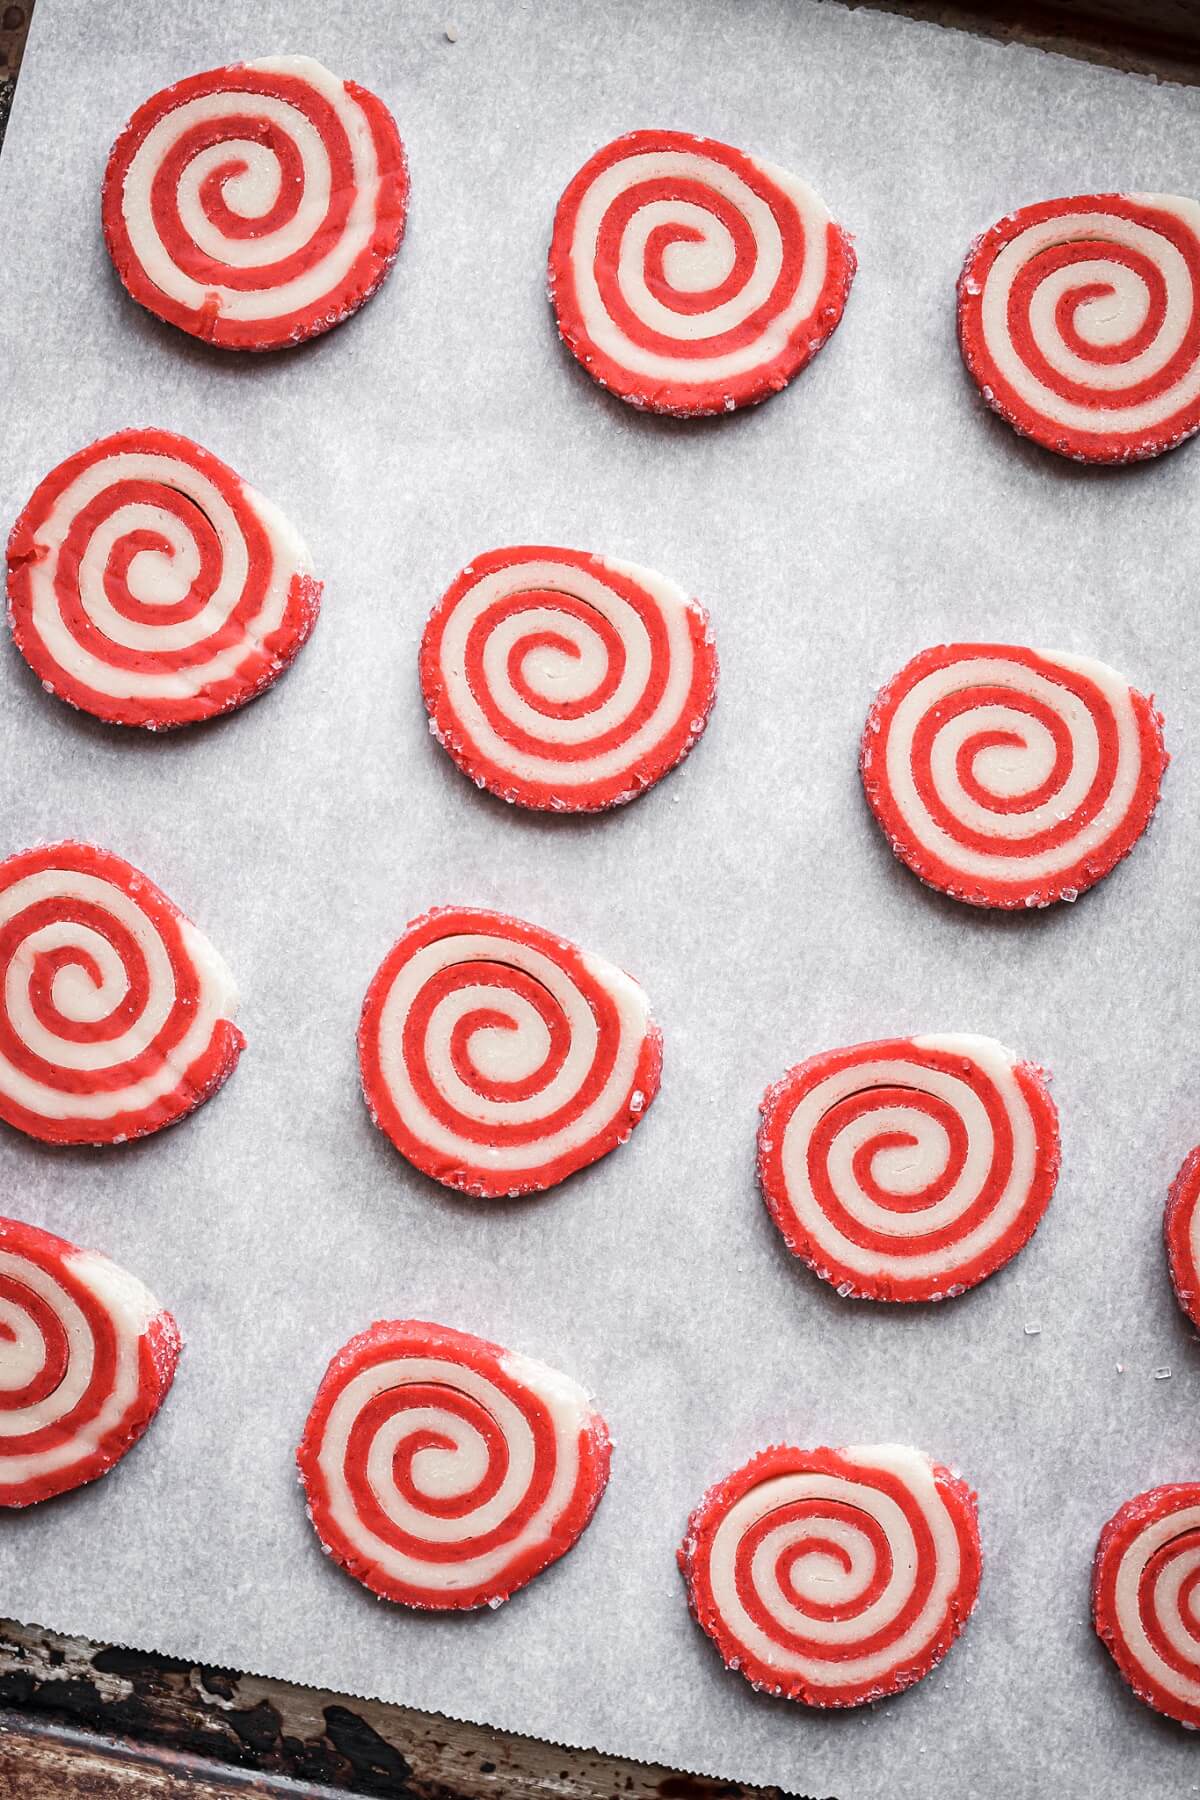 Step 6 for making red and white pinwheel cookies.